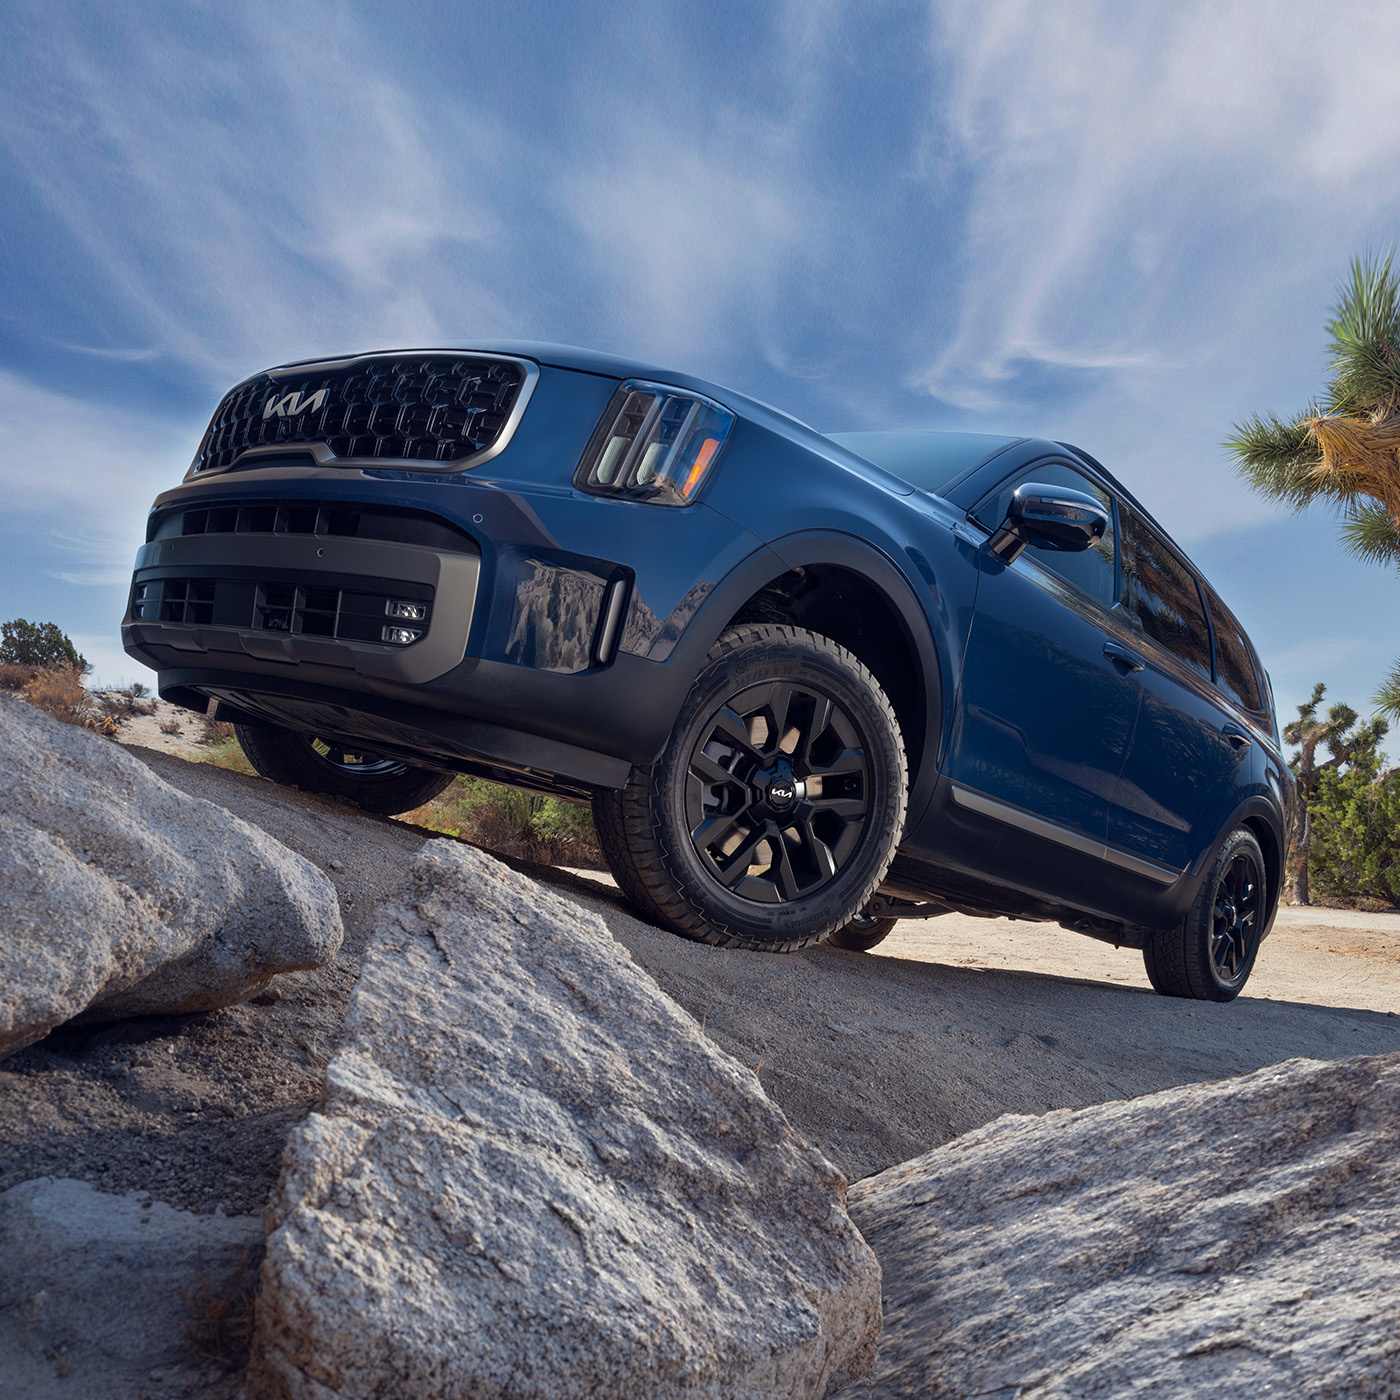 2023 Kia Telluride Driving Off Road Over Large Rocks With Improved Approach And Departure Angles Three-Quarter View